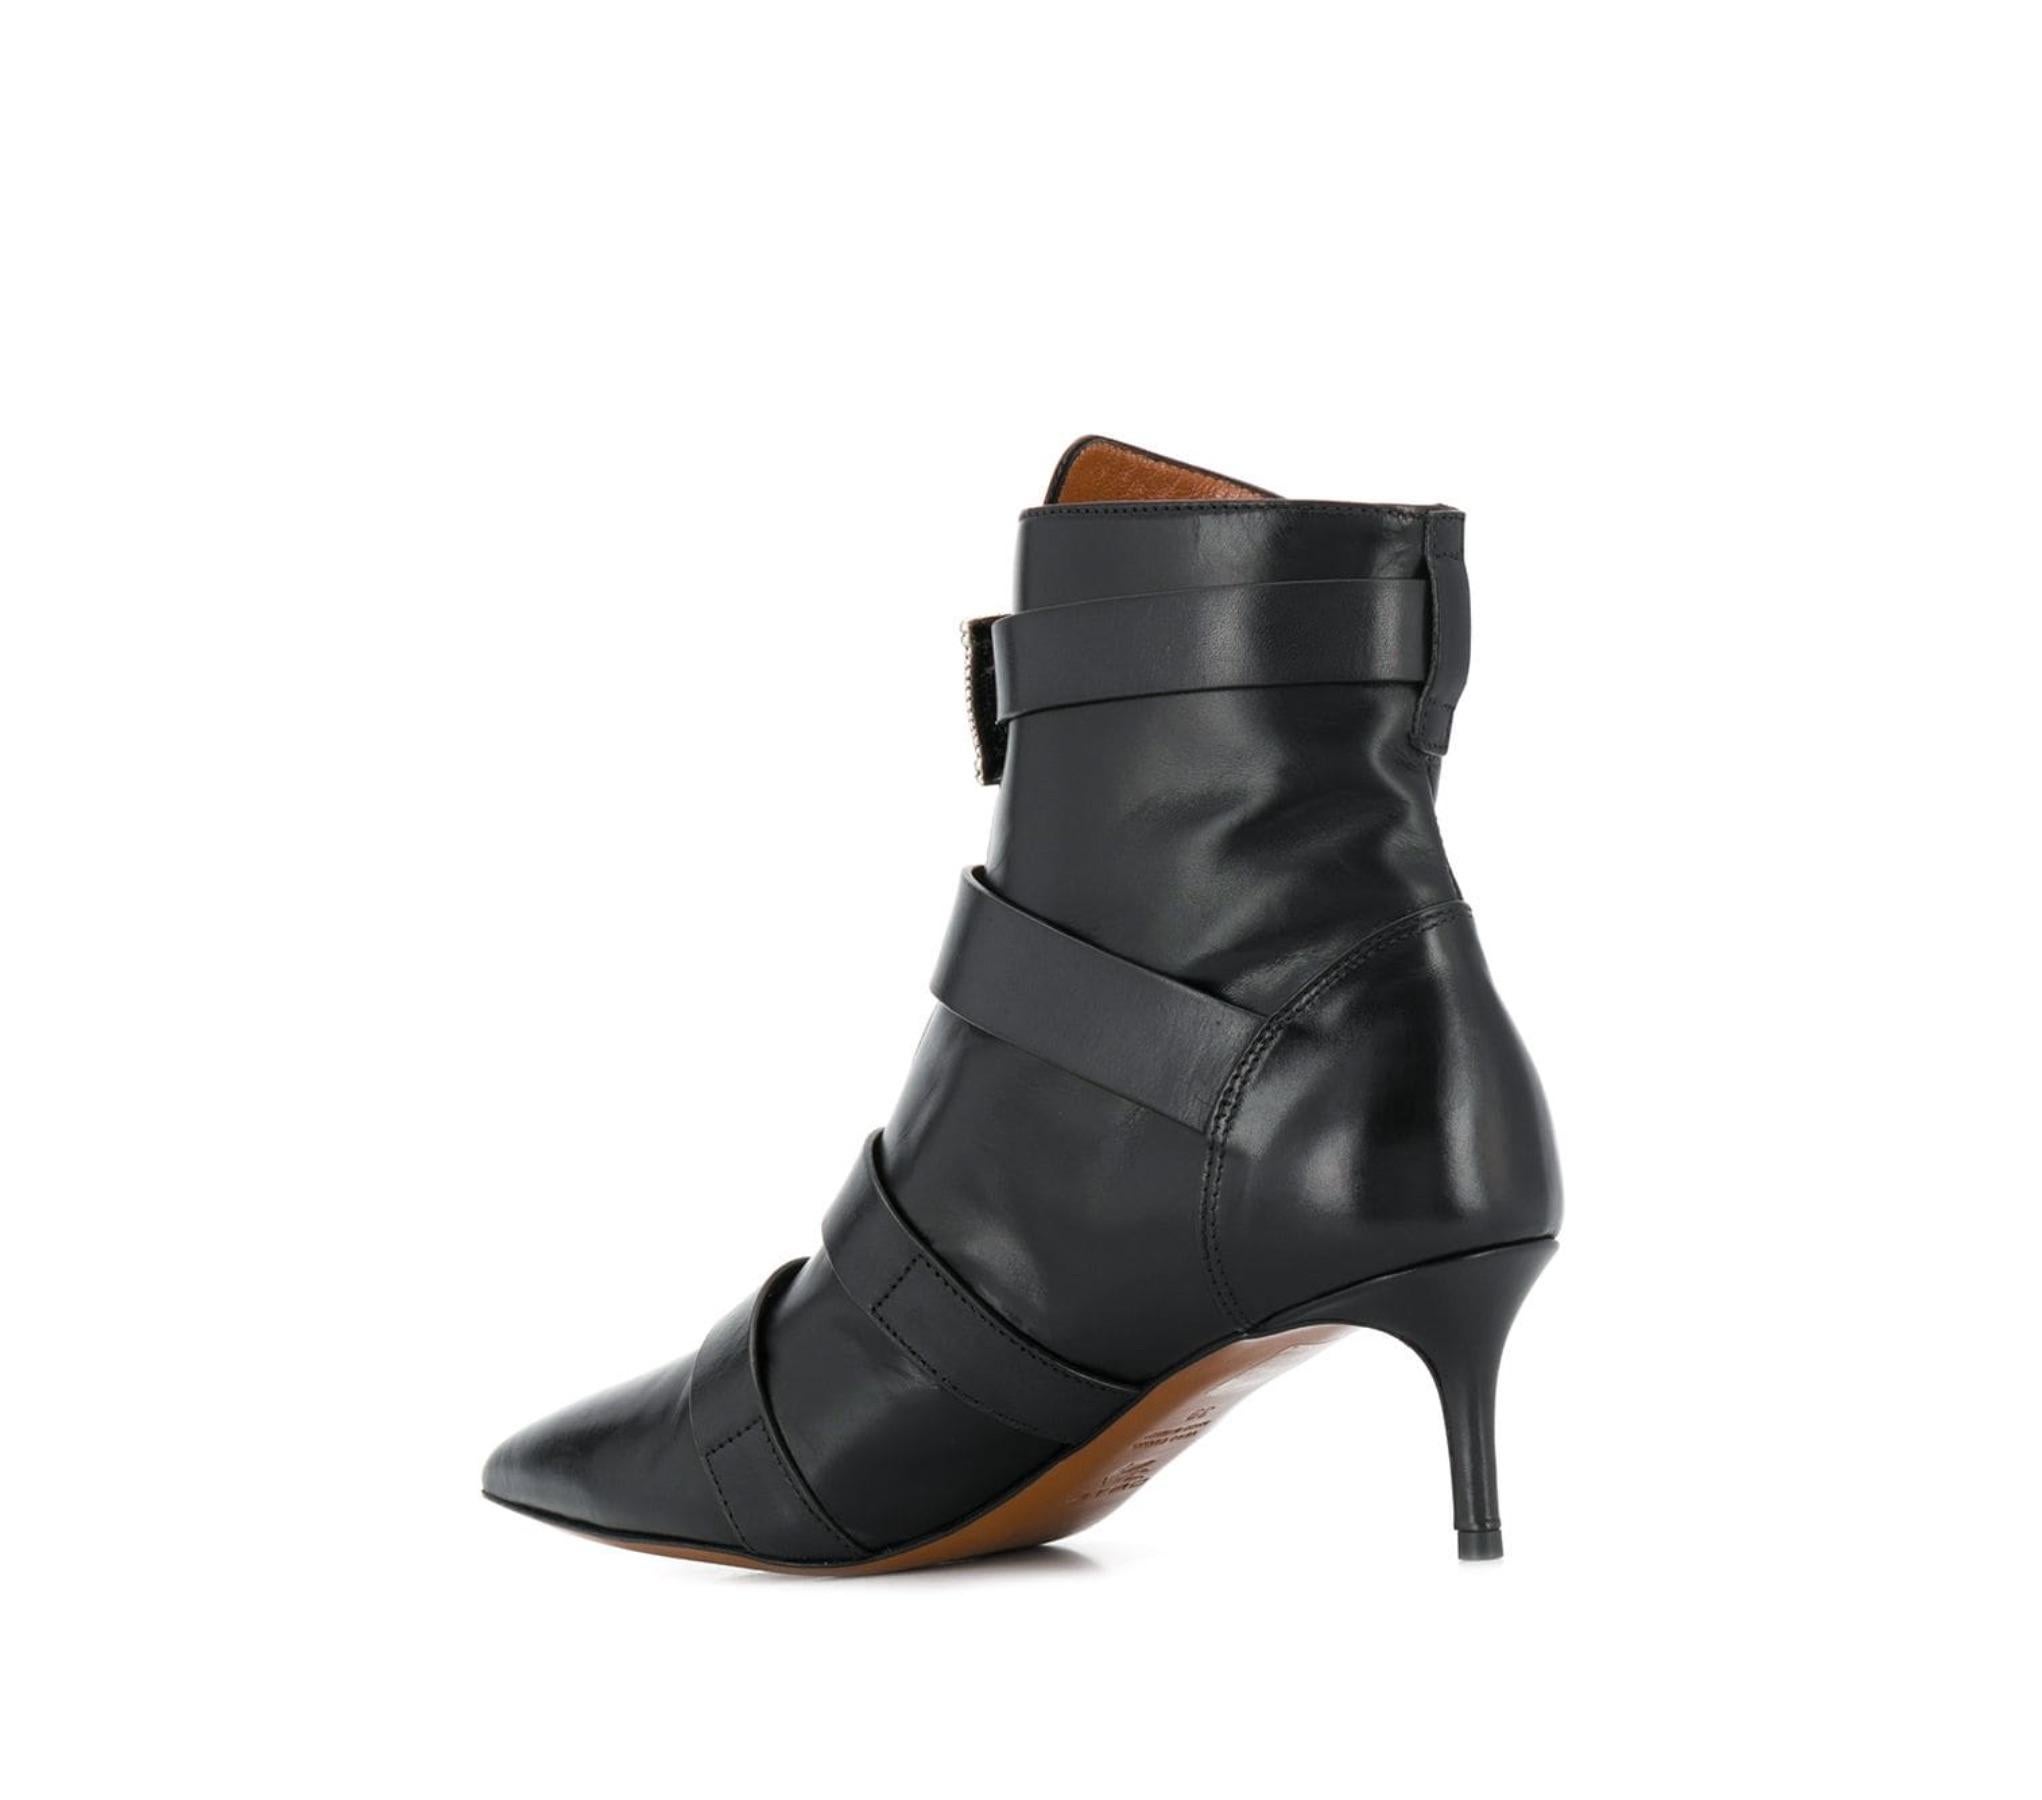 black leather flat ankle boot with side buckle